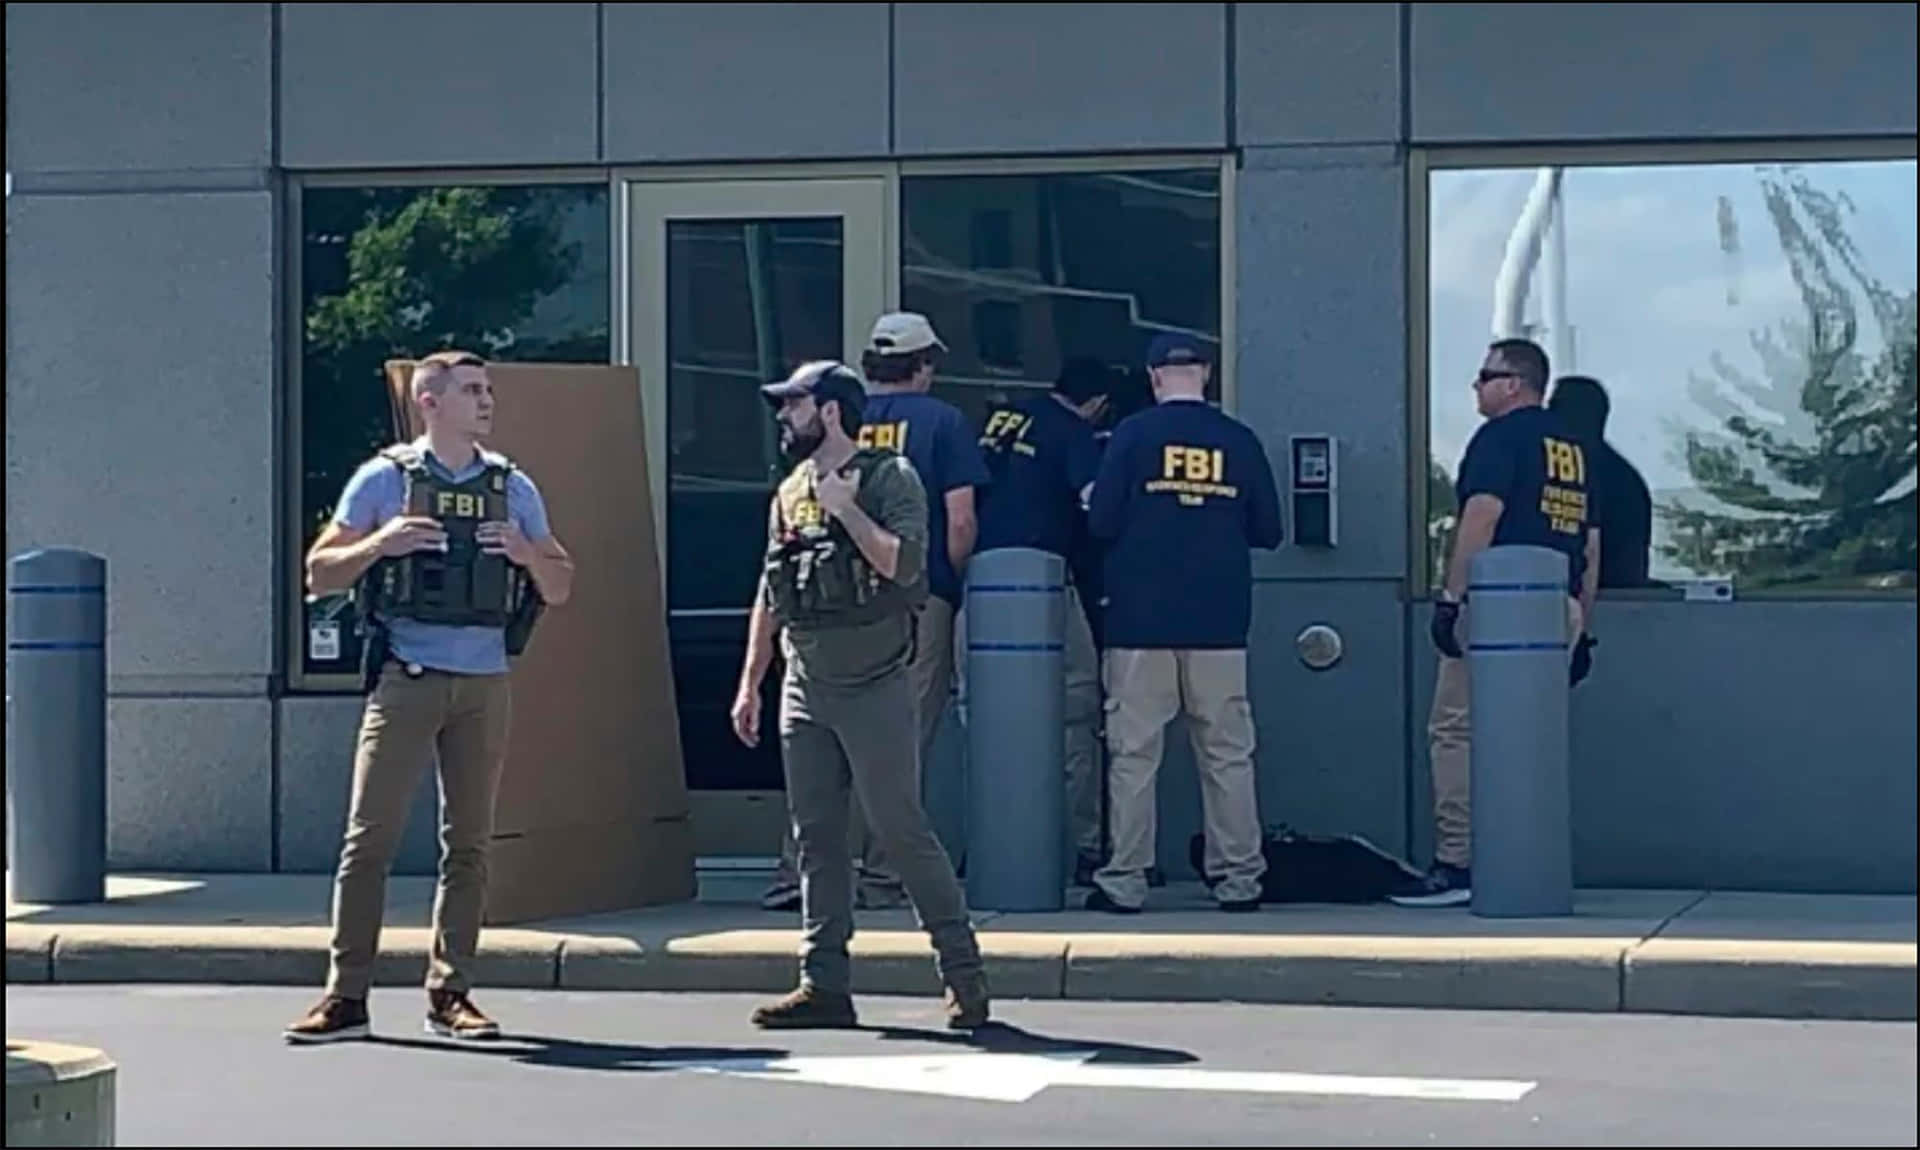 Fbi Agents Stand Outside A Building Background